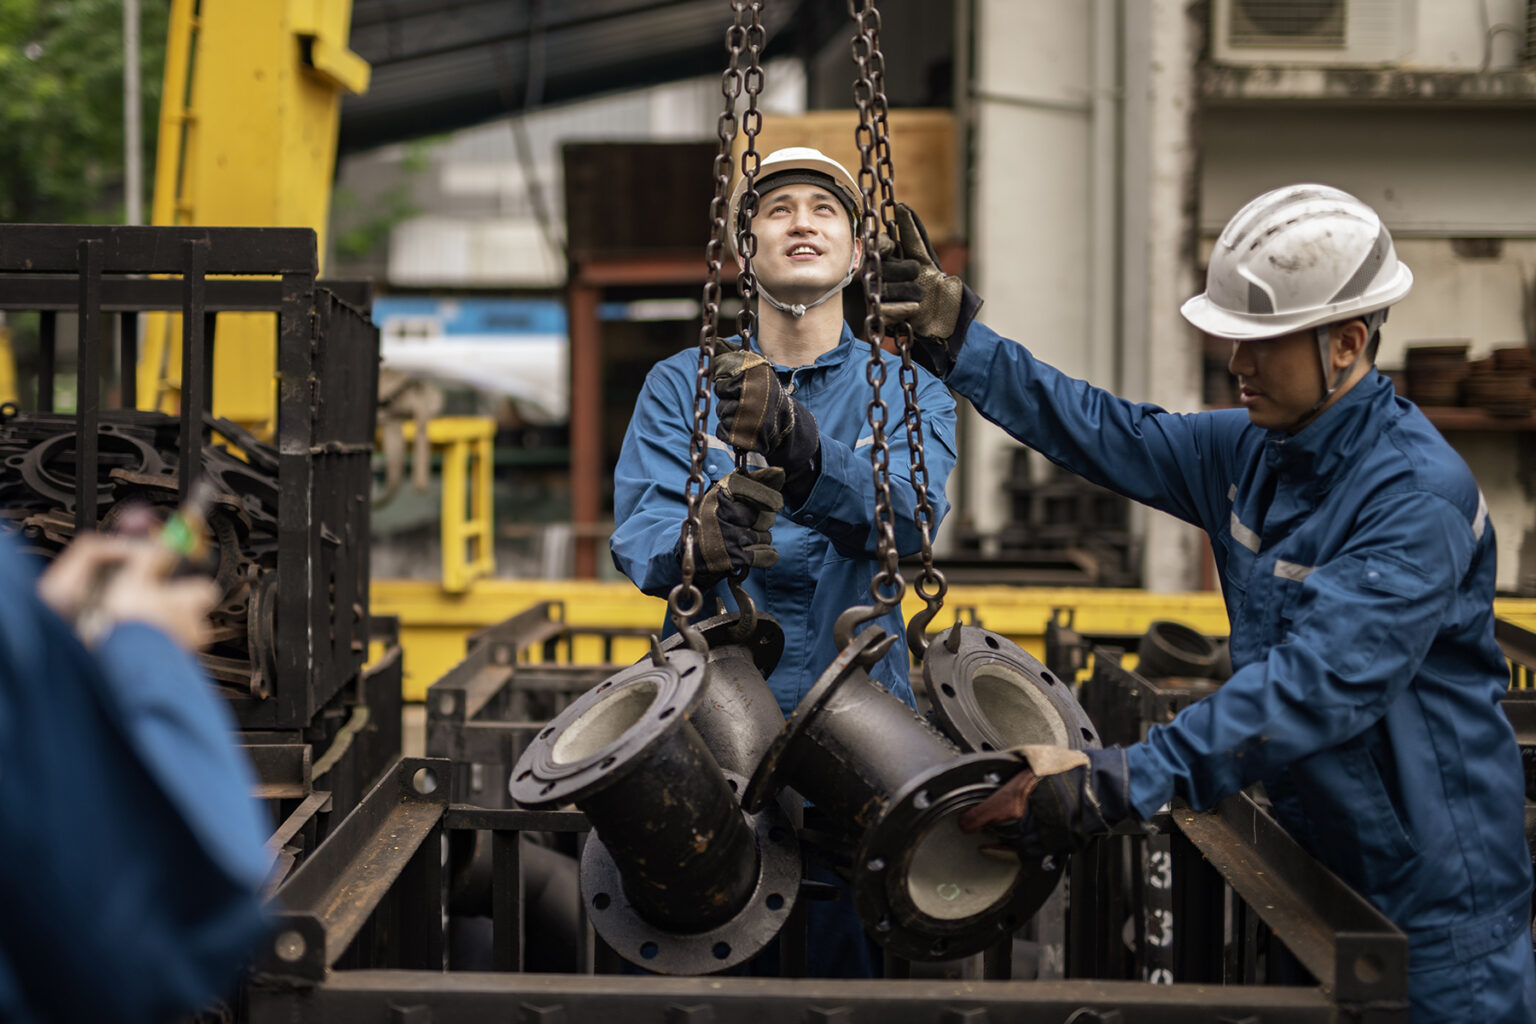 Engineers or technicians wearing hard hats and blue overalls lowers down parts of a machine with chains